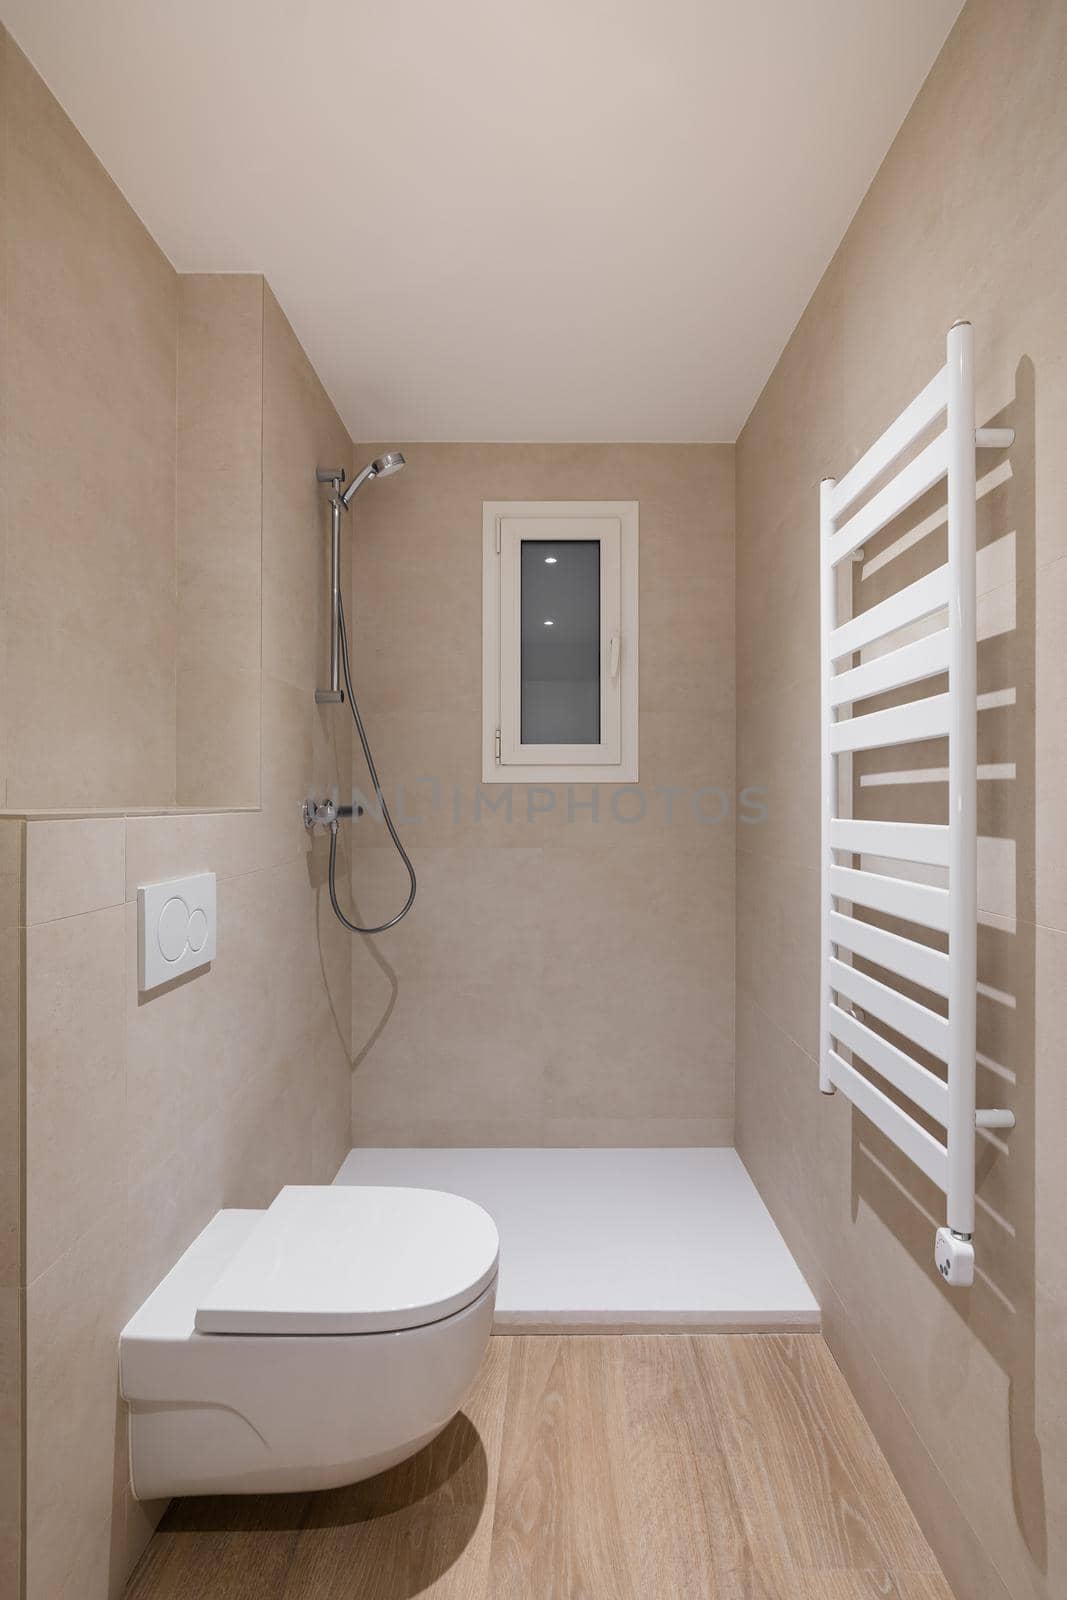 Bathroom with toilet, shower and heating radiator. Vertical view of modern minimalist interior by apavlin